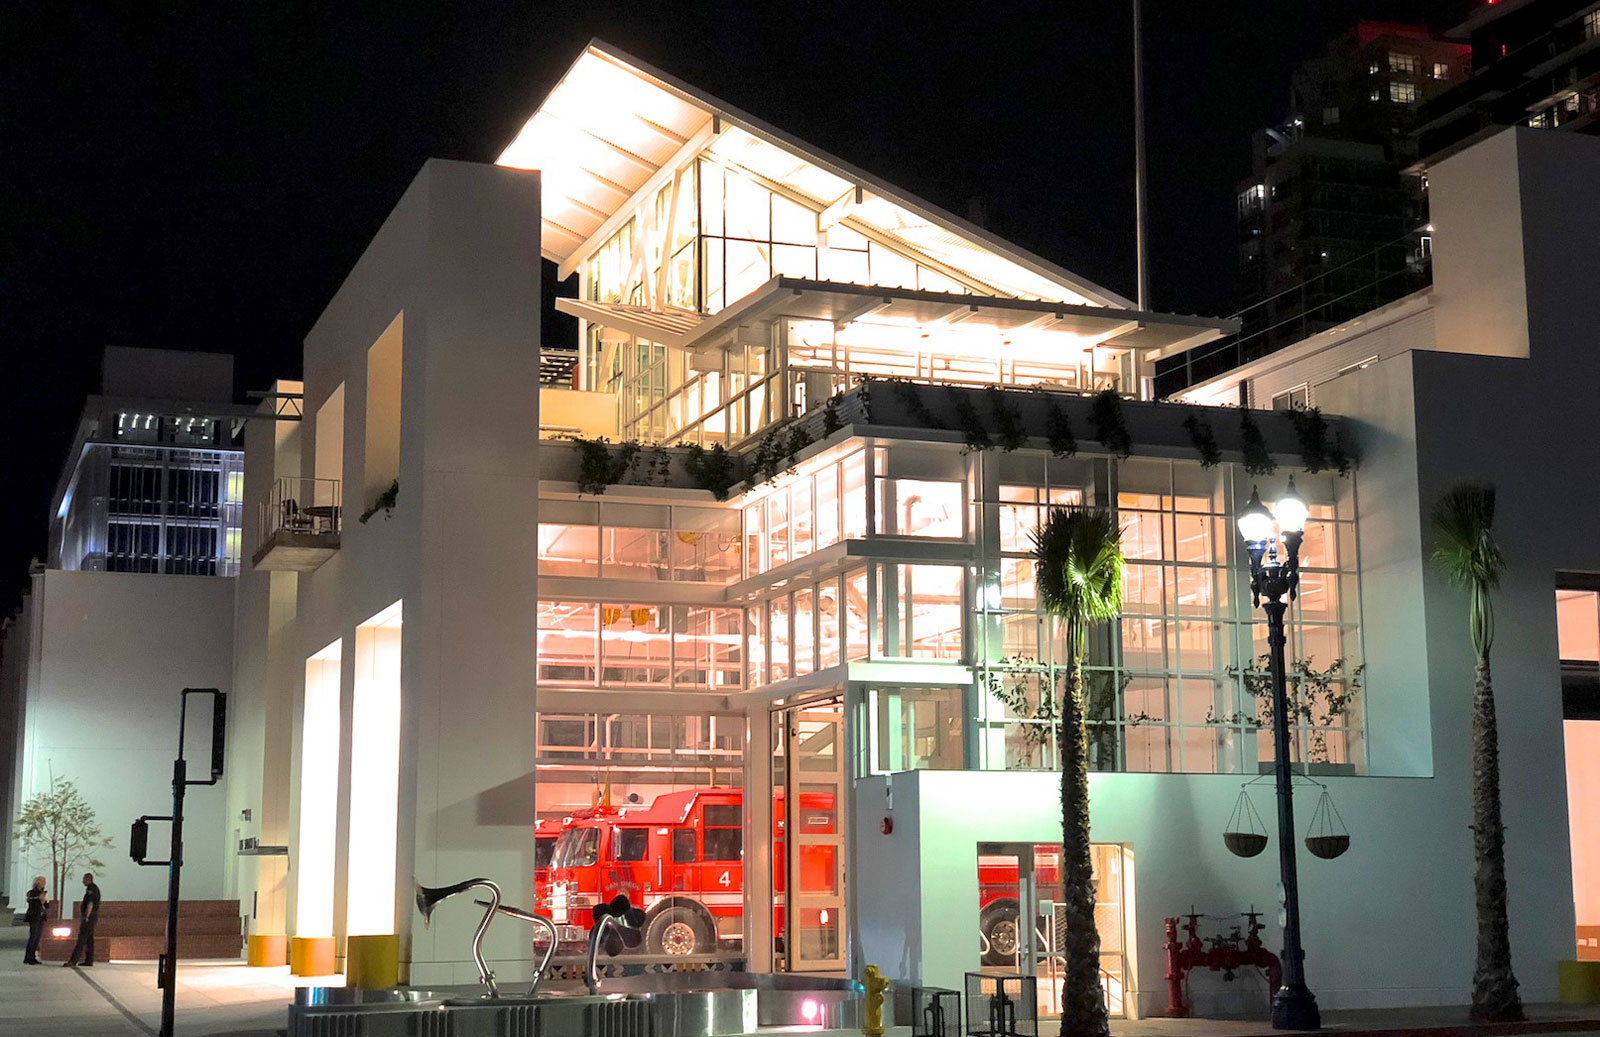 bayside fire station exterior at night